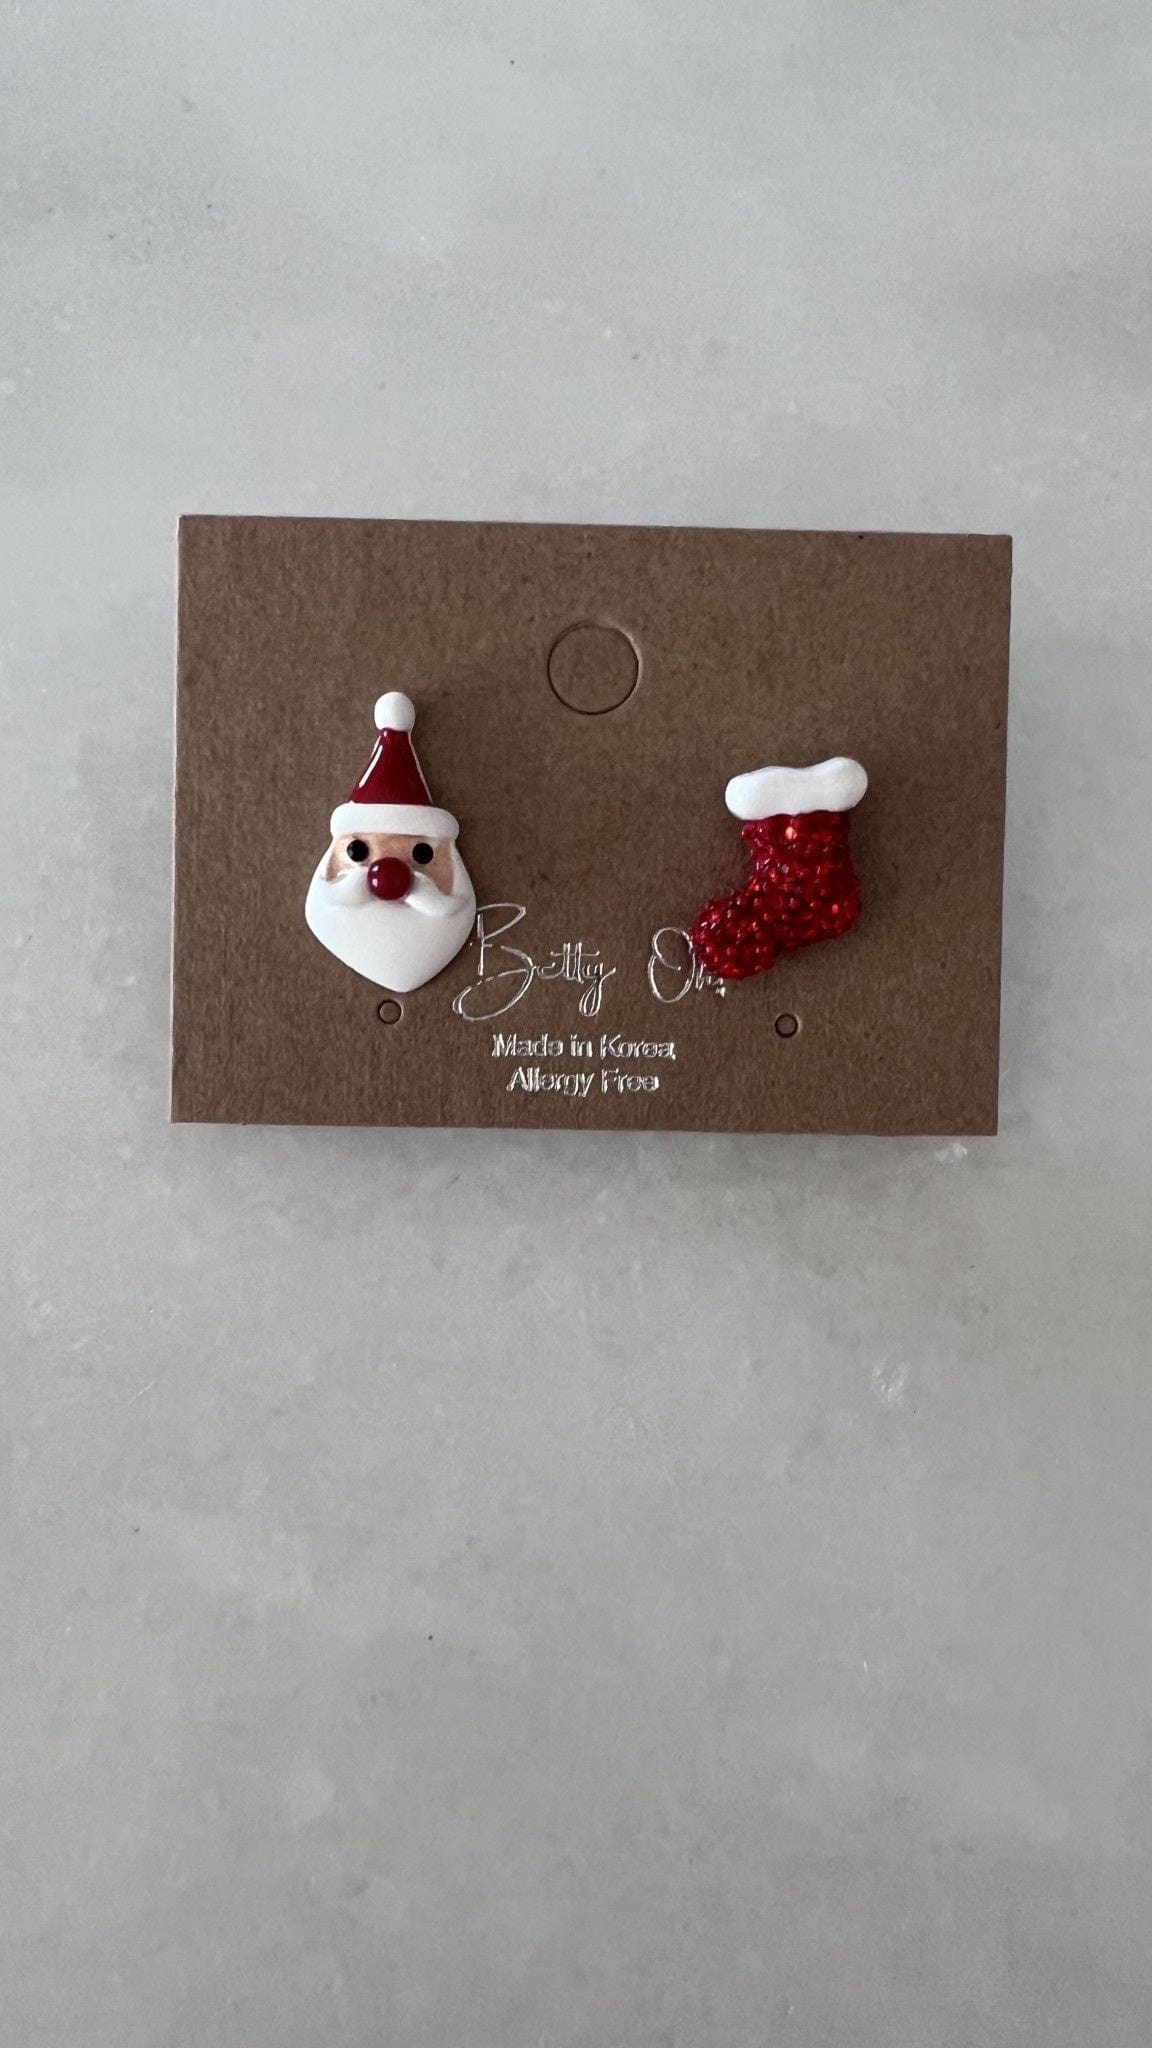 Crystal Works Default Santa and Red Stocking Earrings Allergy Free